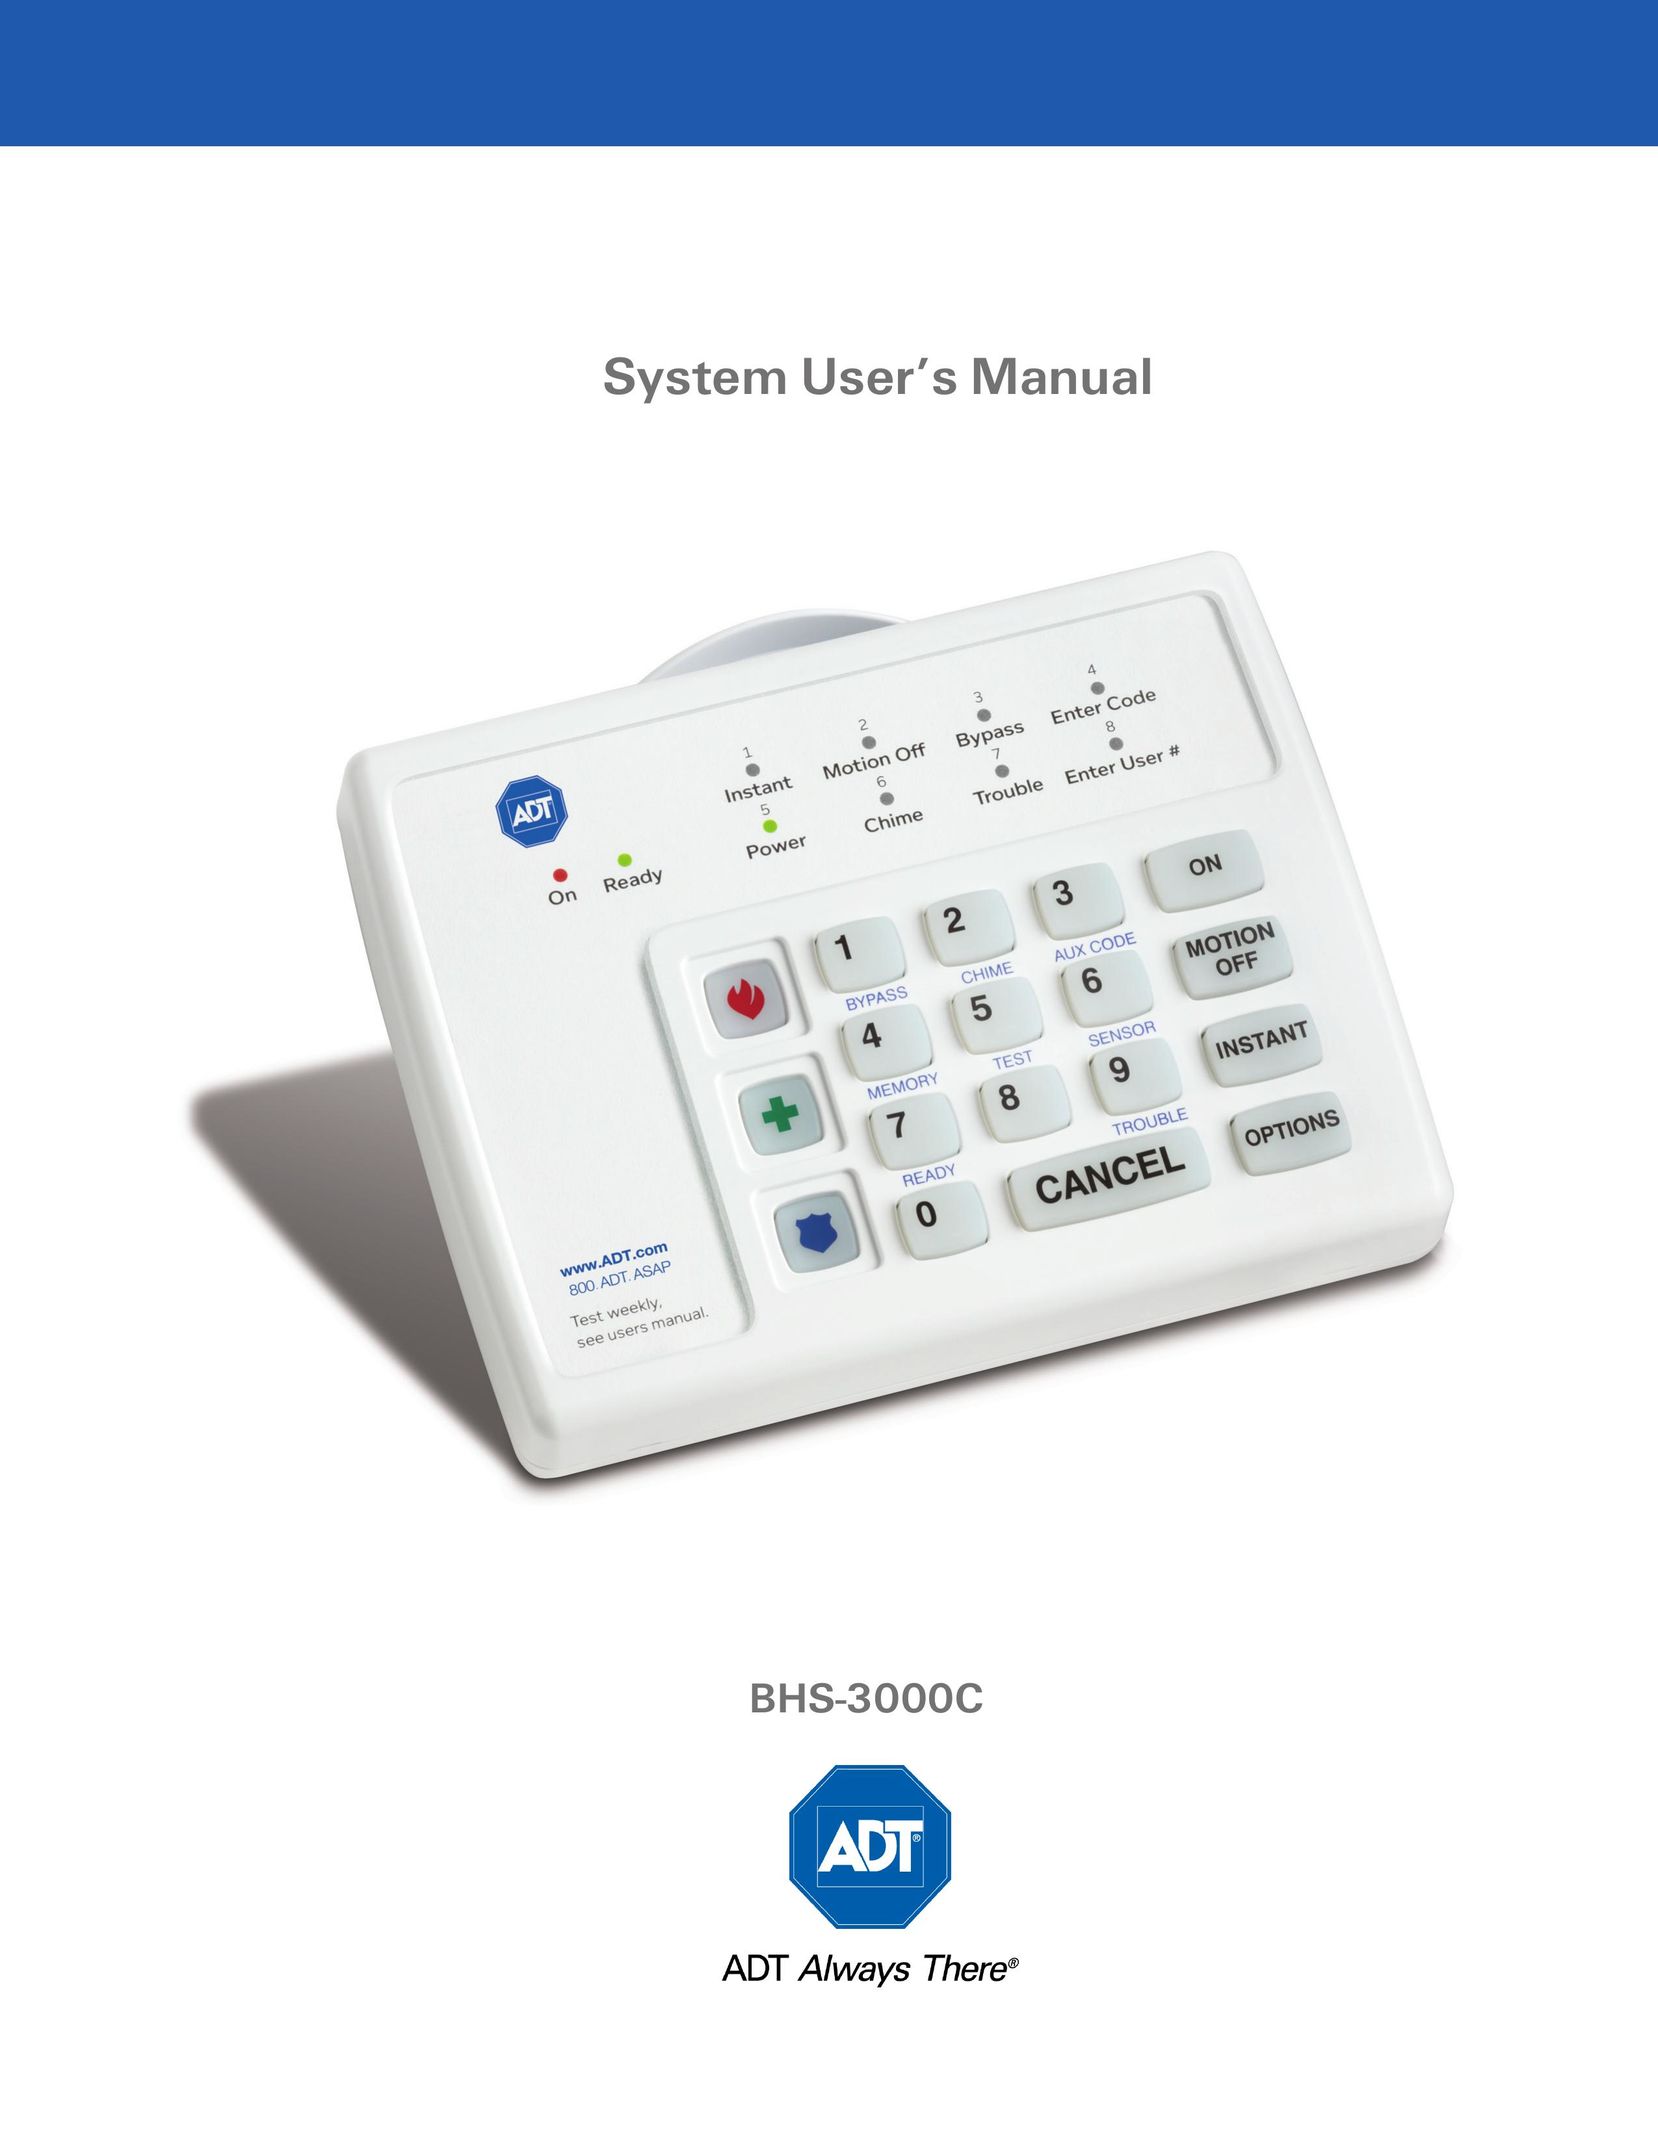 ADT Security Services BHS-3000C Home Security System User Manual